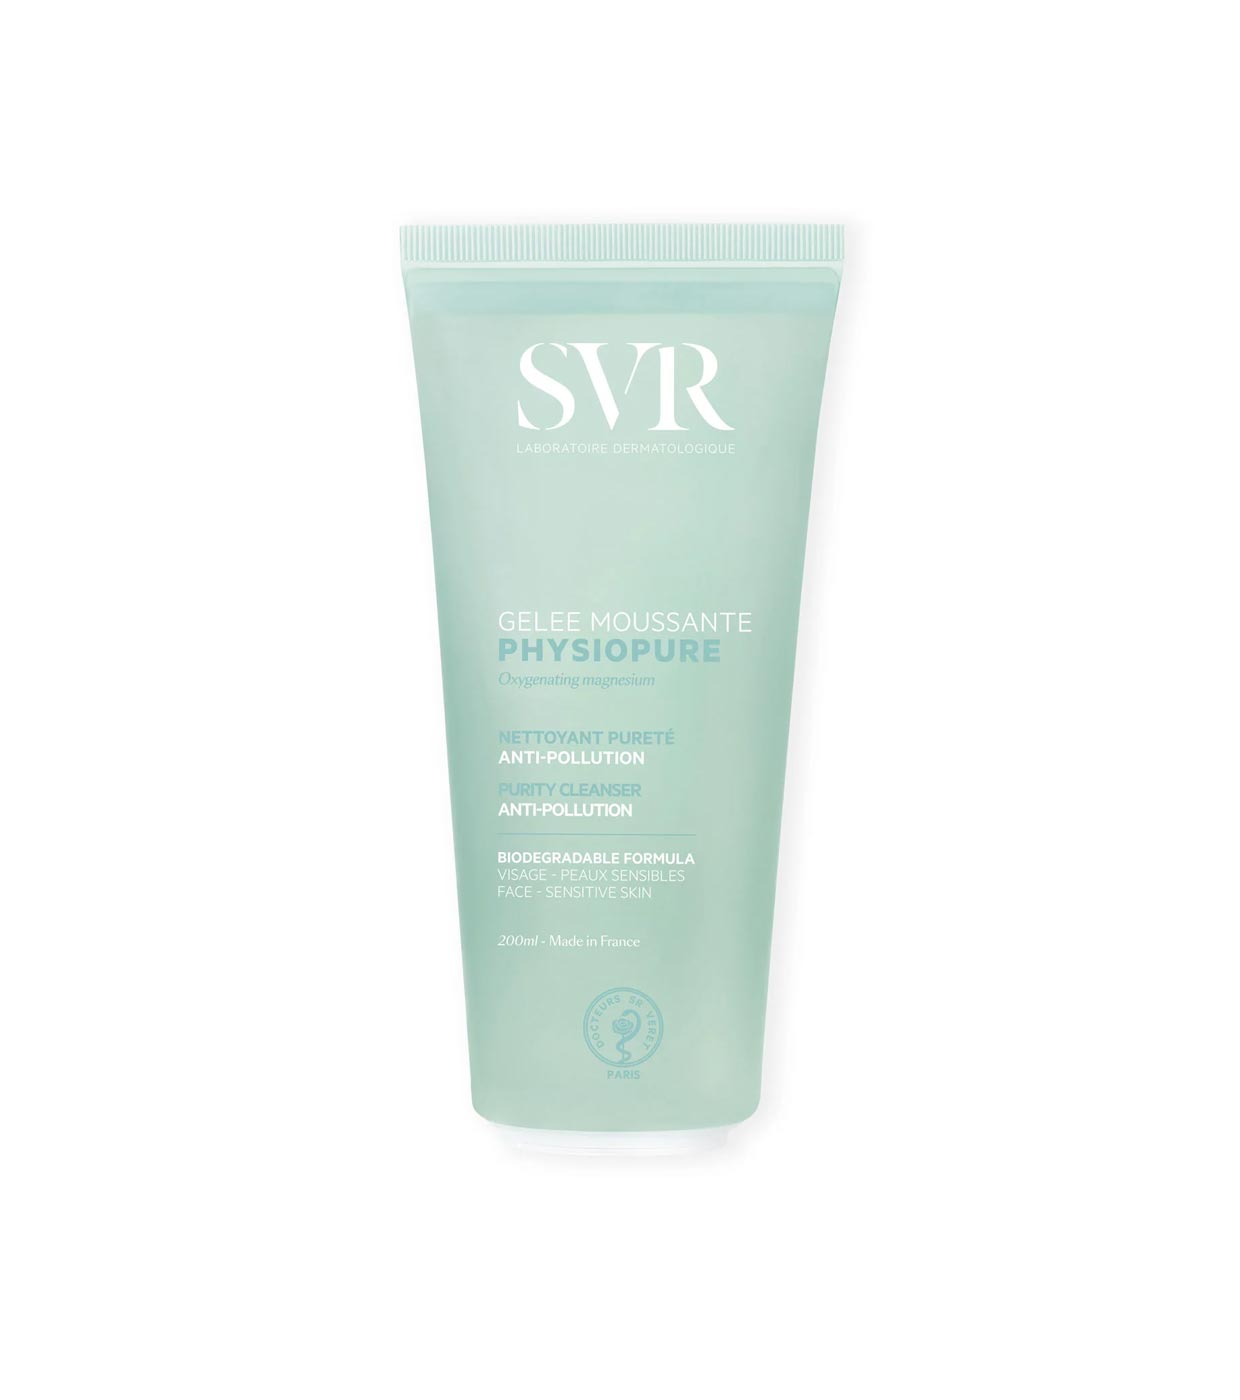 SVR - *Physiopure* - Purifying and anti-pollution facial cleansing gel 200ml